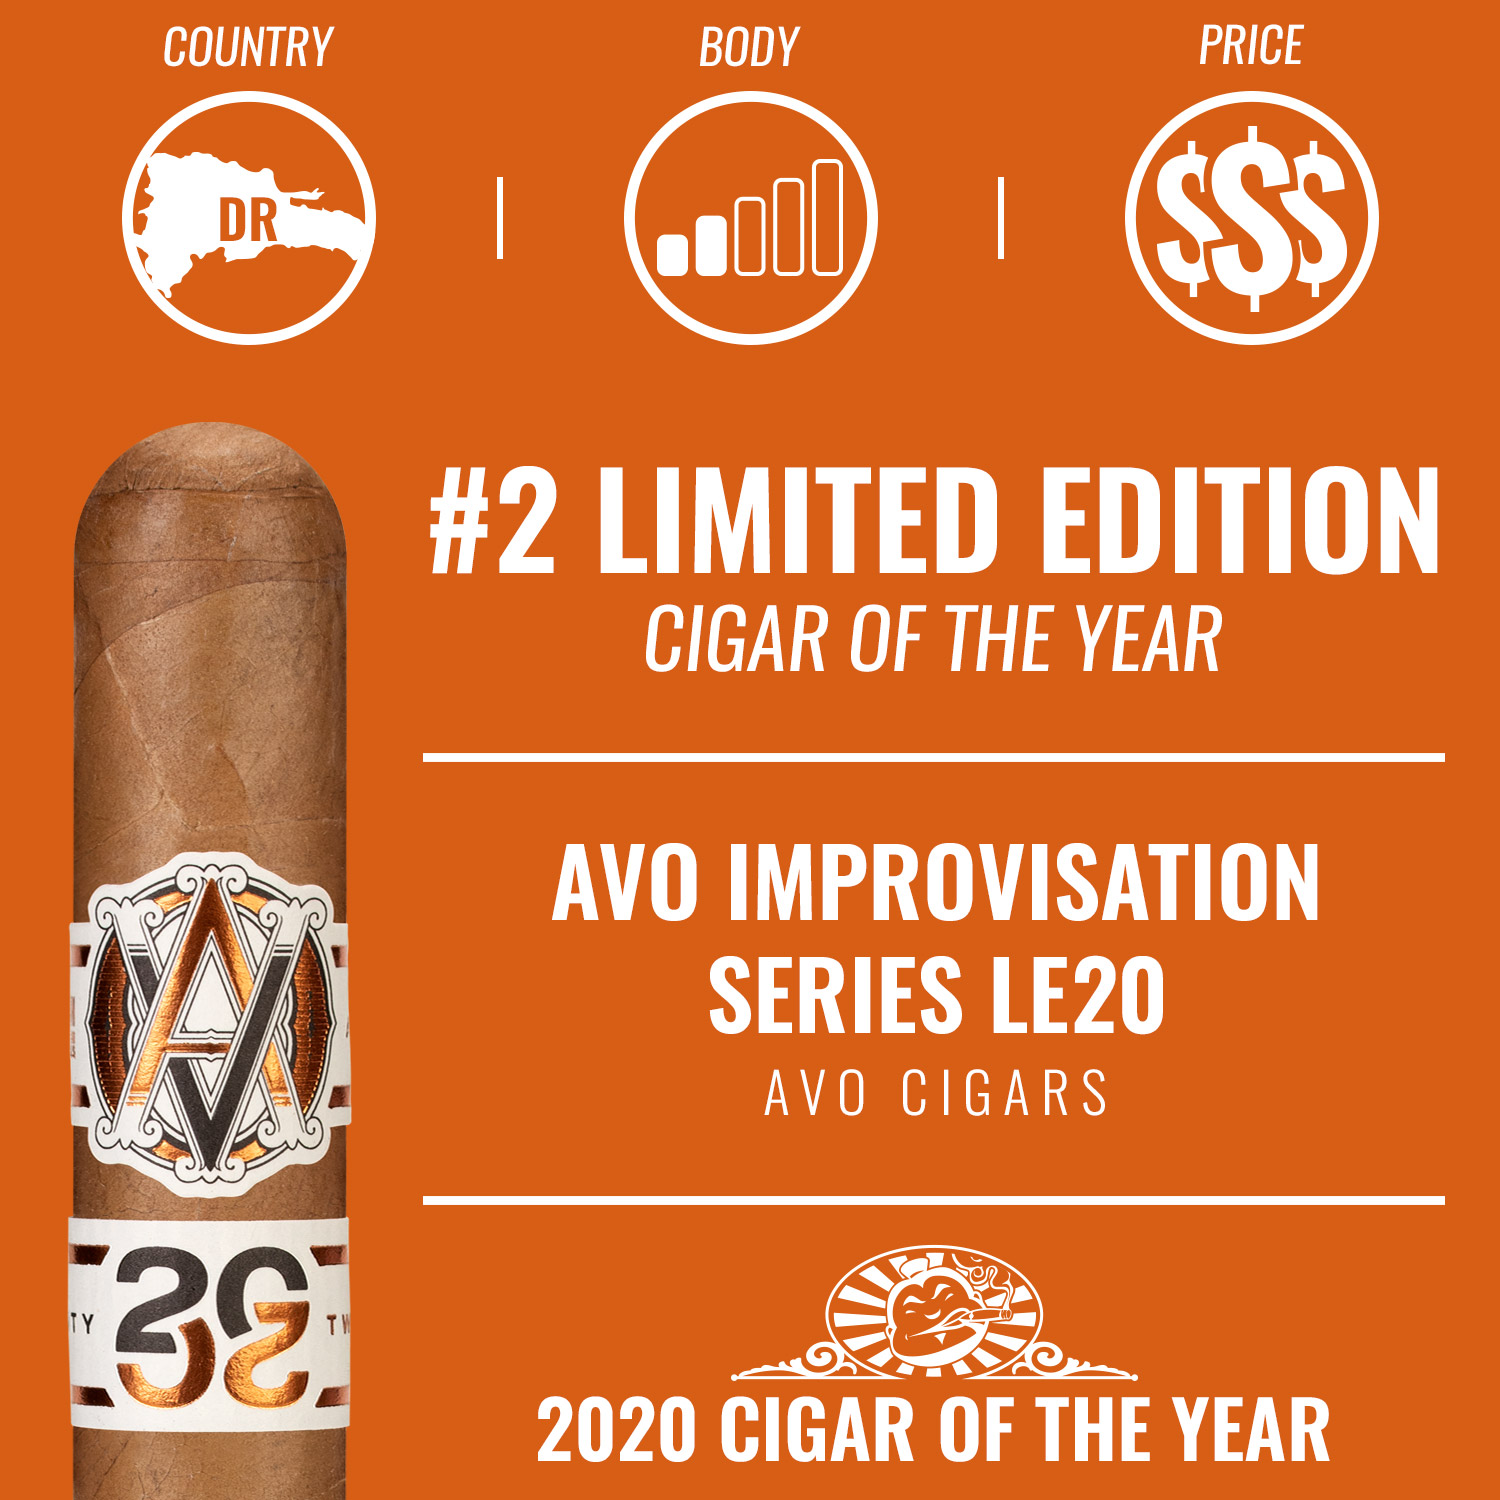 AVO Improvisation Series LE20 No. 2 Limited Edition Cigar of the Year 2020